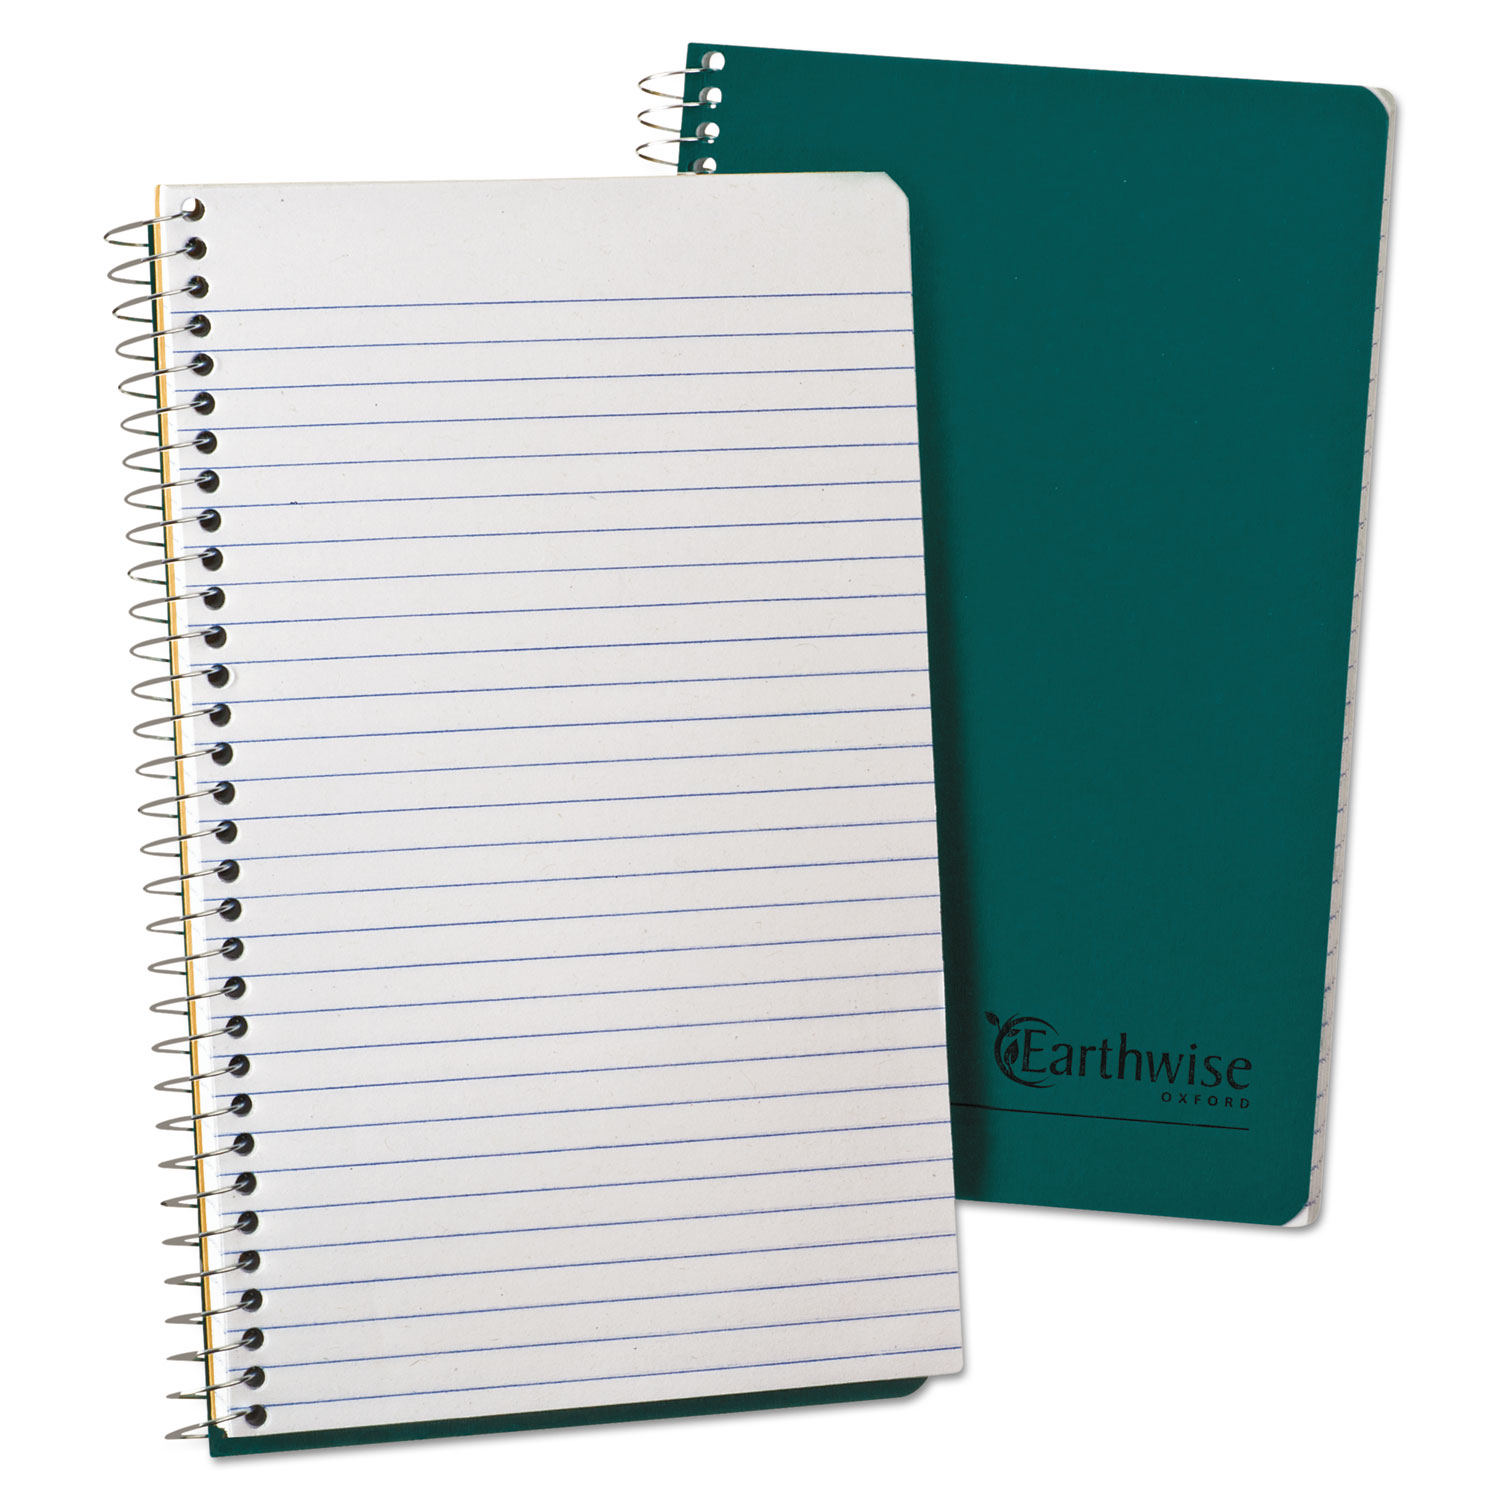 Oxford TOP25400 Earthwise Single Subject Notebook, Narrow Rule, 8 x 5, White Paper, 80 Sheets